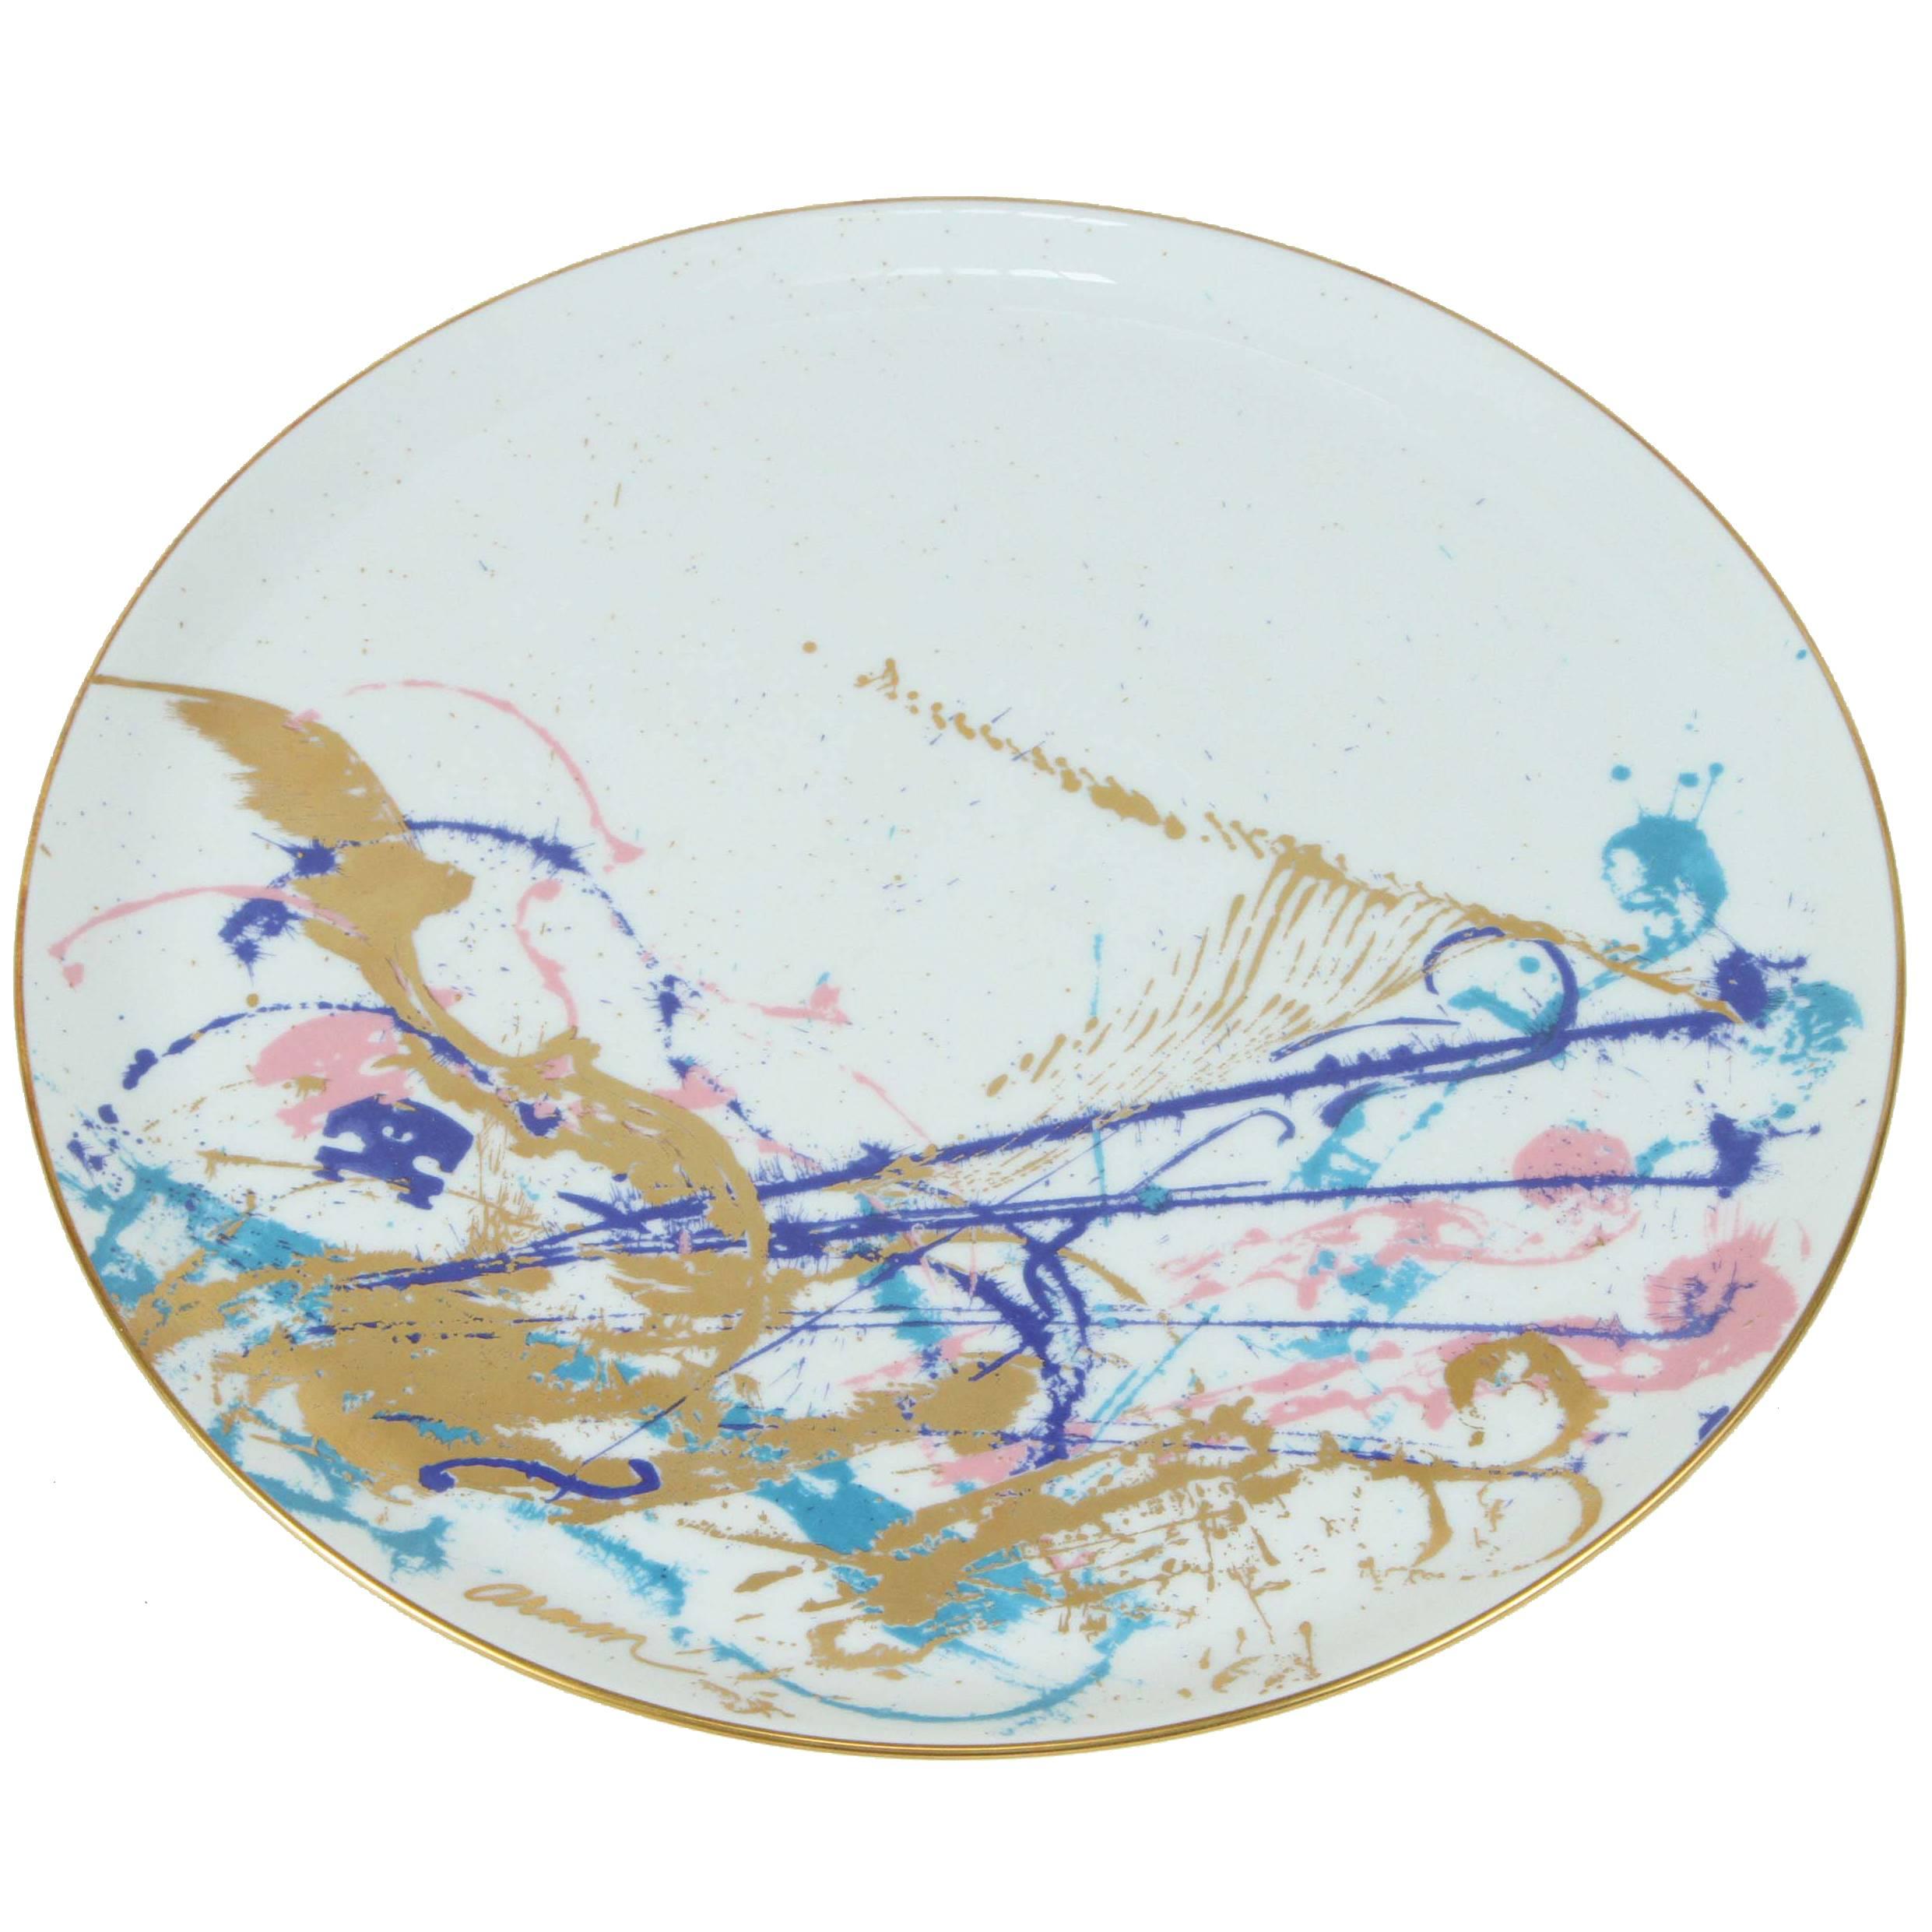 Concerto after Arman, Limited Edition, Plate Number 30 for Rosenthal